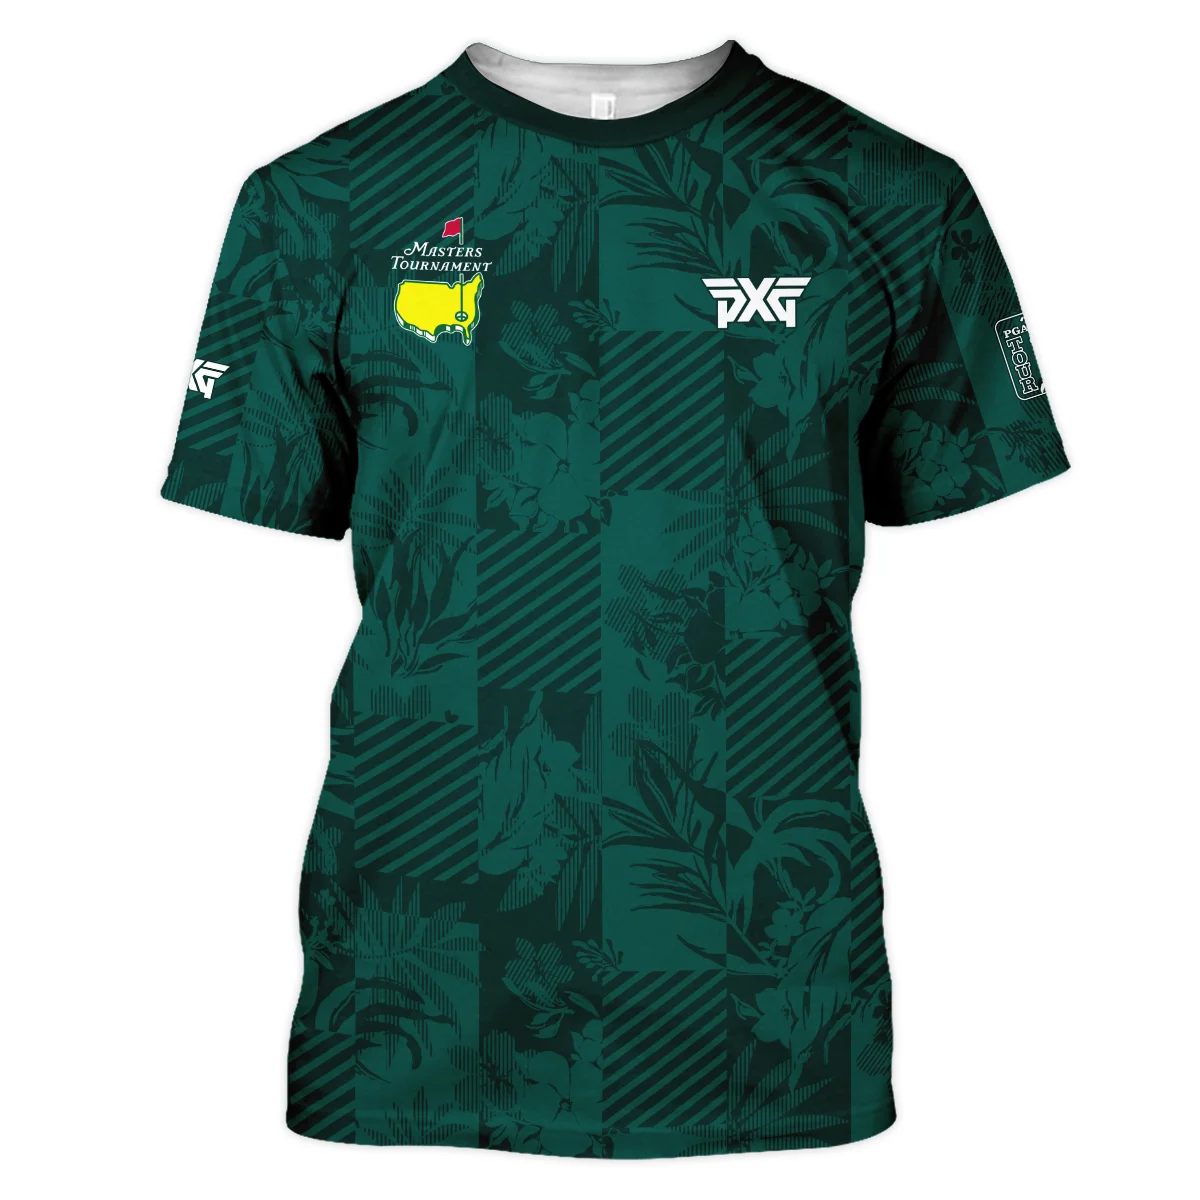 Tropical Leaves ,Foliage With Geometric Stripe Pattern Golf Masters Tournament Unisex T-Shirt Style Classic T-Shirt